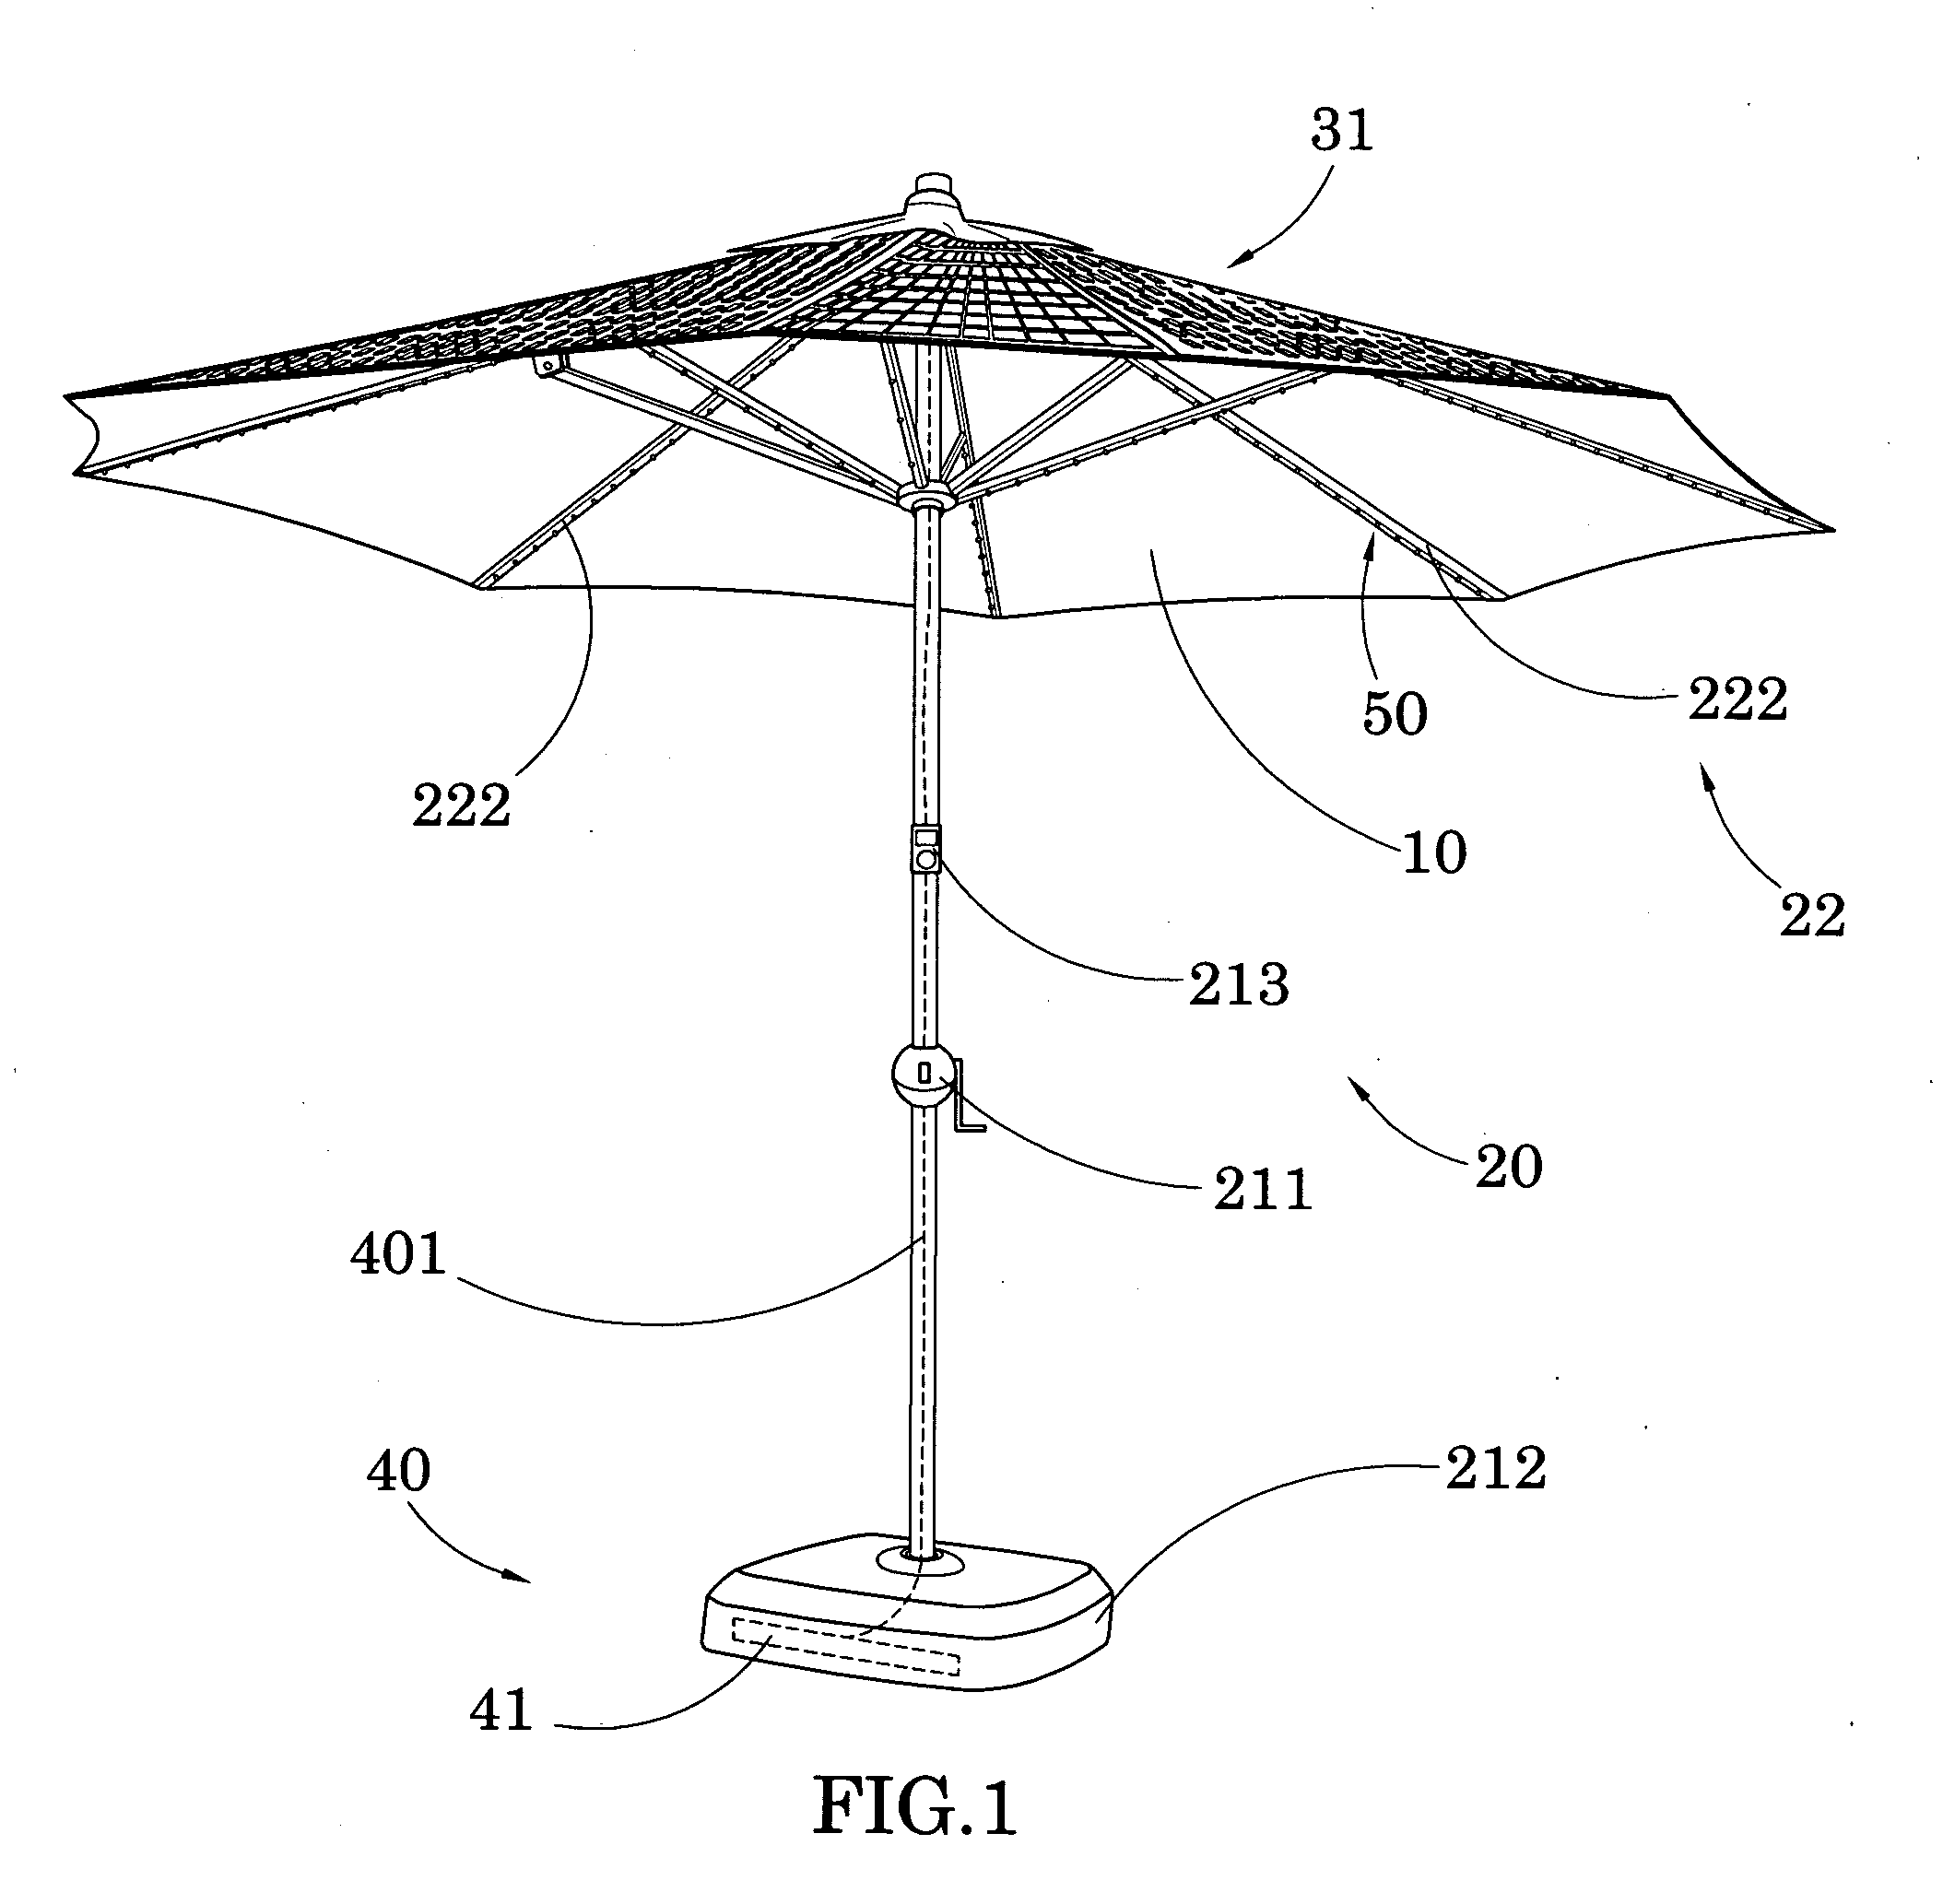 Outdoor shading device with renewable power system